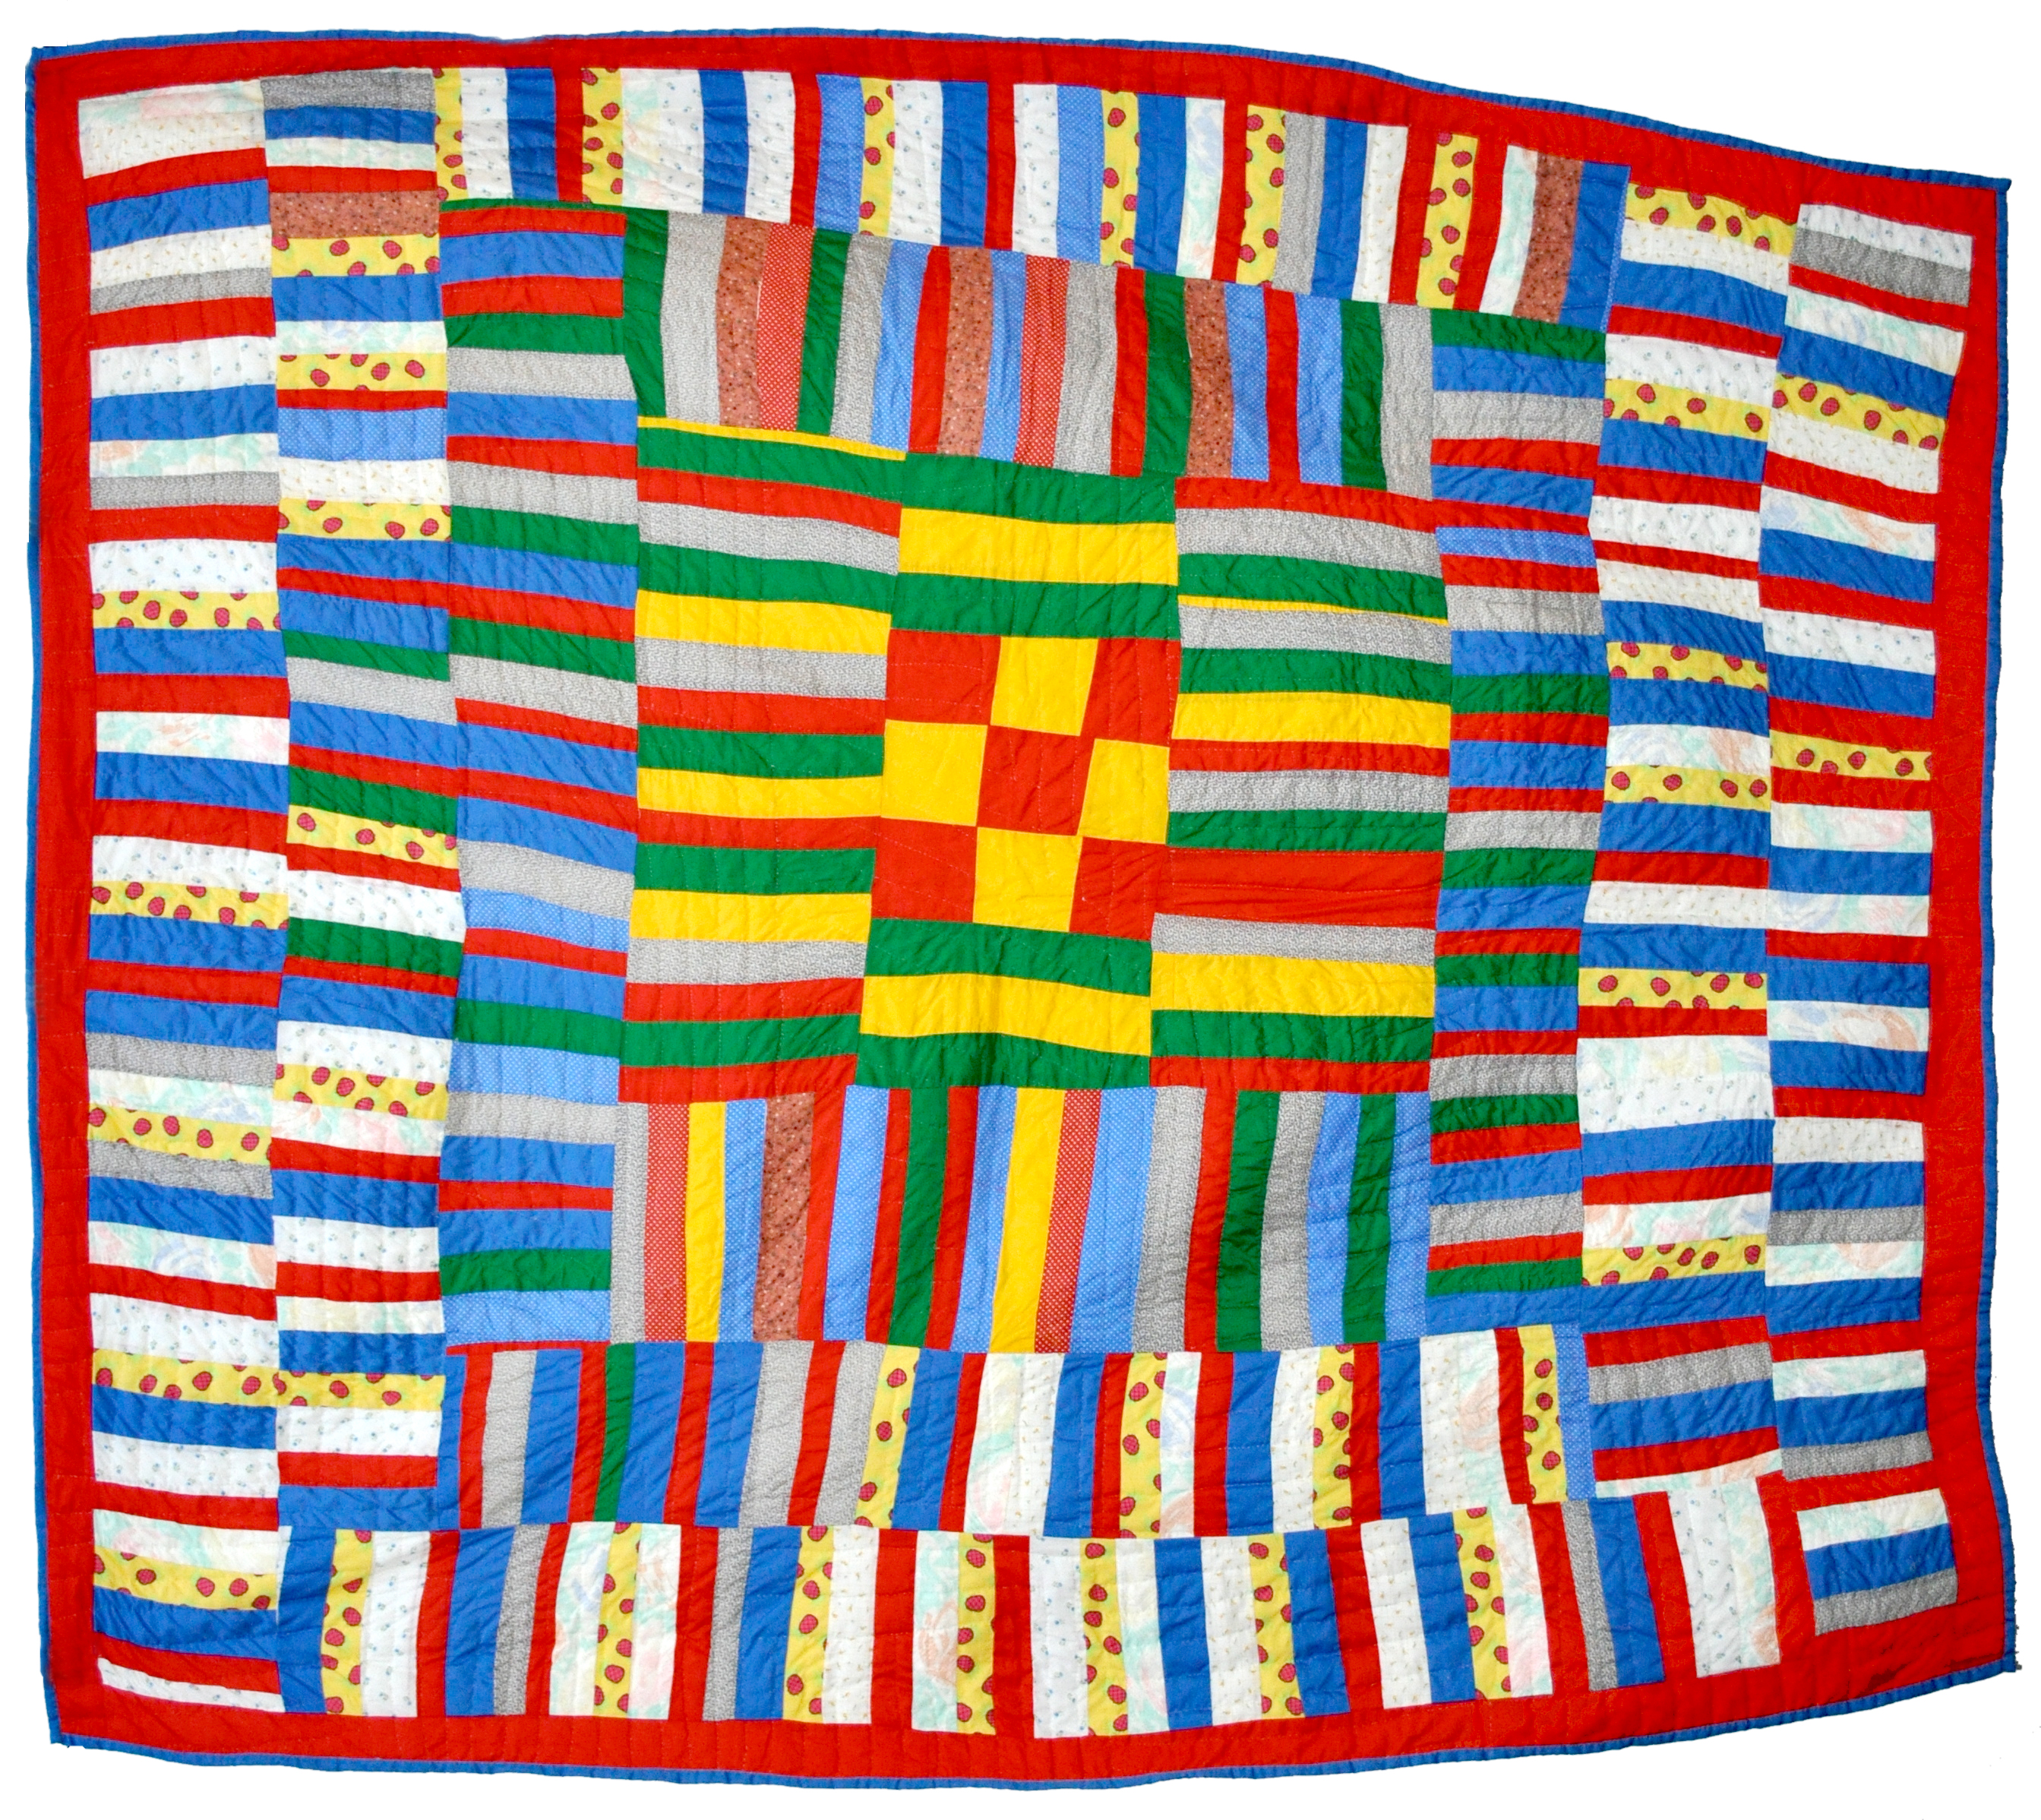 Photograph of blanket. Many colors, shapes. Rectangles, squares, circles.